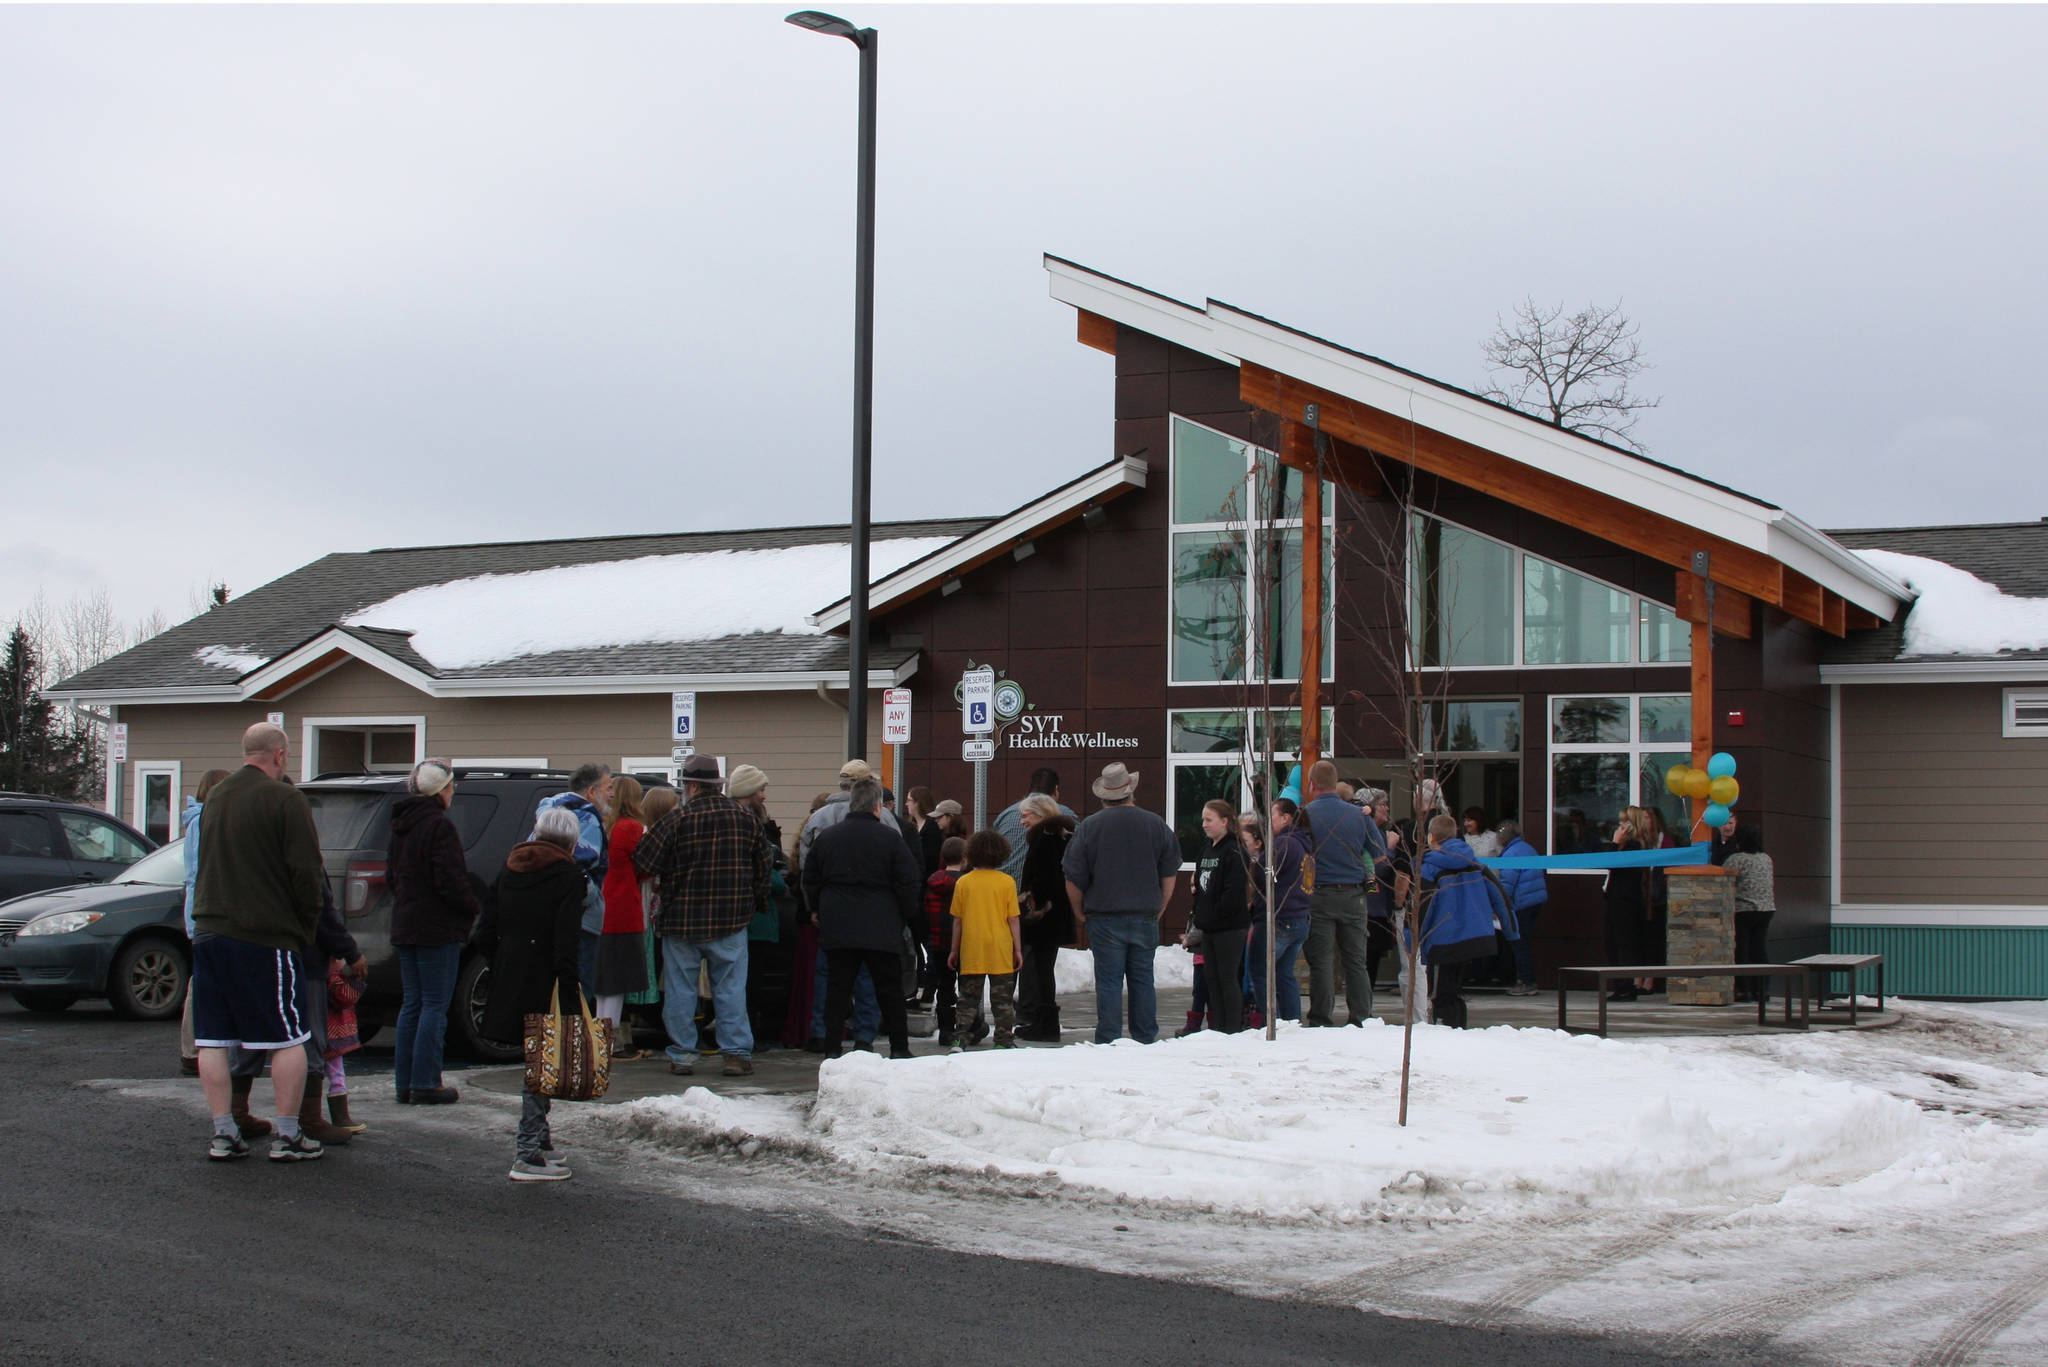 Members of the Anchor Point community and surrounding areas flock to the new SVT Health and Wellness center located on the corner of Sterling Highway and Milo Fritz Avenue for the grand opening ceremony and reception at noon Friday, March 8, 2019, in Anchor Point, Alaska. (Photo by Delcenia Cosman)